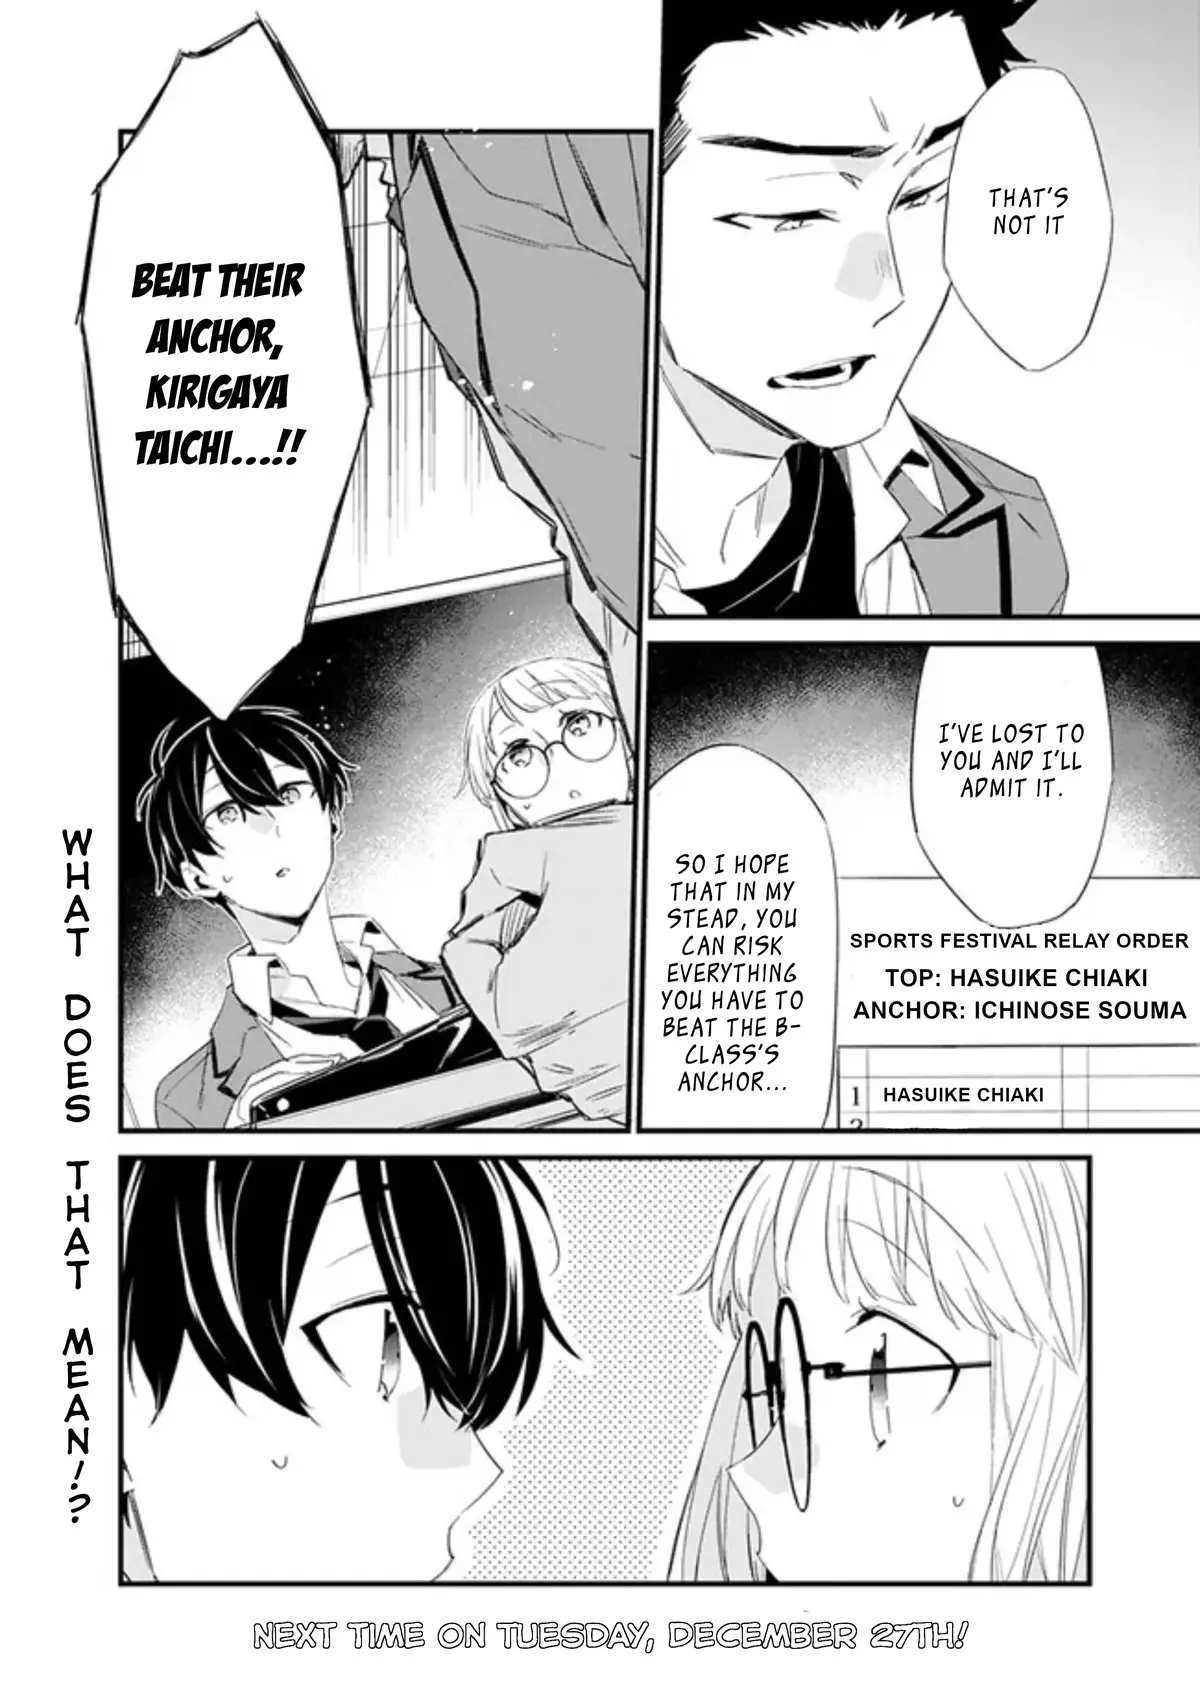 I’M Sick And Tired Of My Childhood Friend’S, Now Girlfriend’S, Constant Abuse So I Broke Up With Her - 3.1 page 26-4597e09f